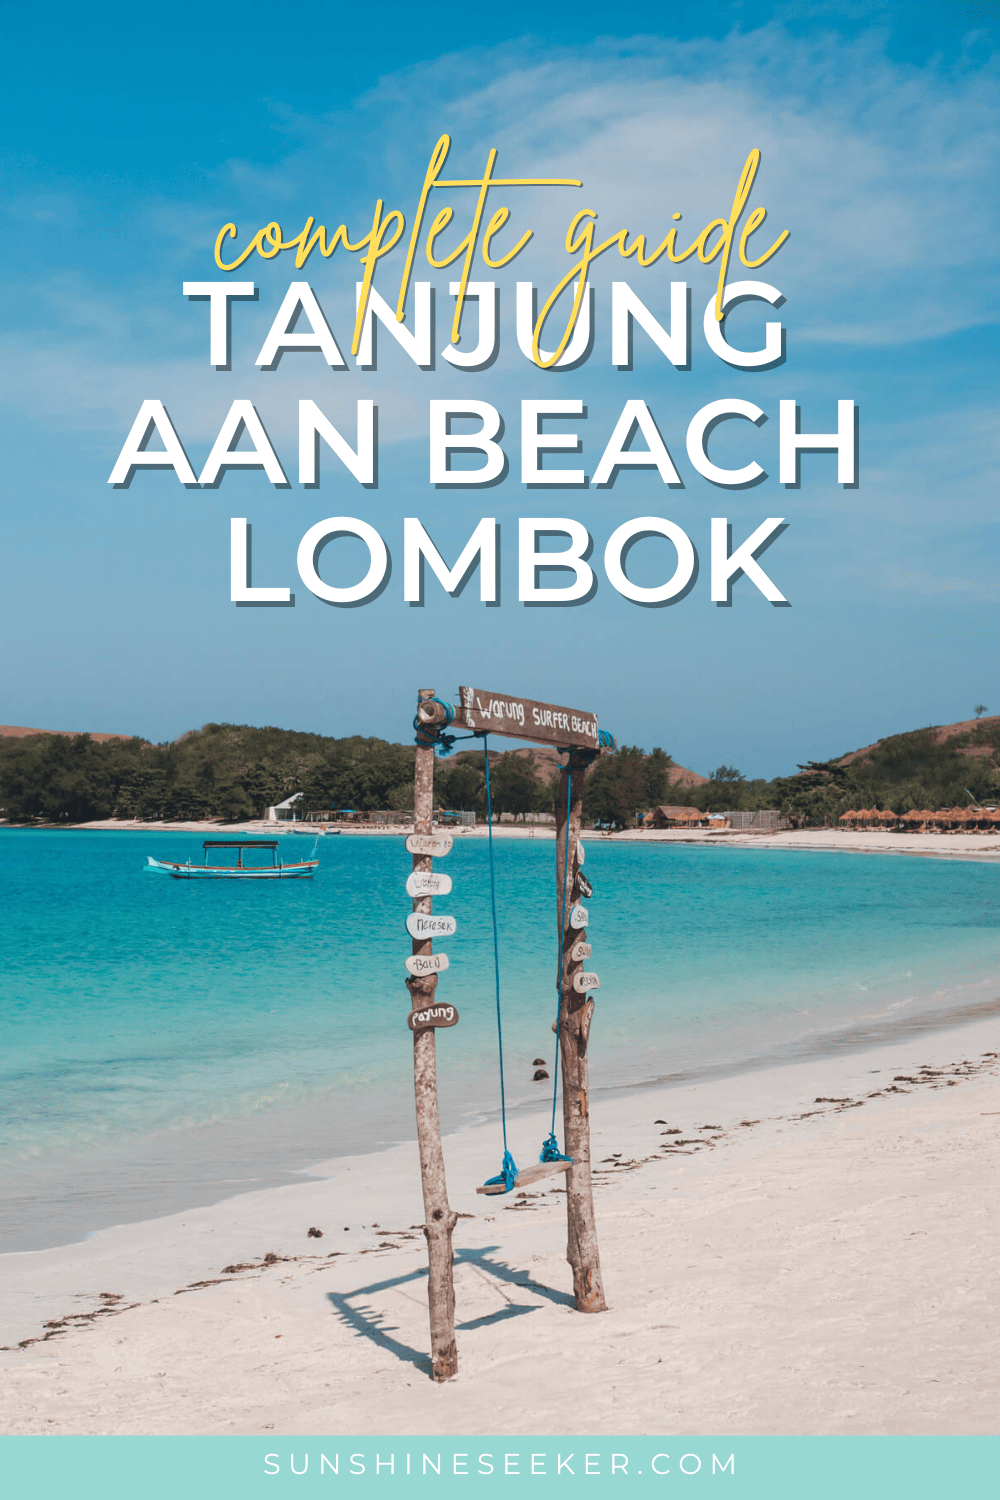 Tanjung Aan Crystal-Clear Waters and White Sands Bliss